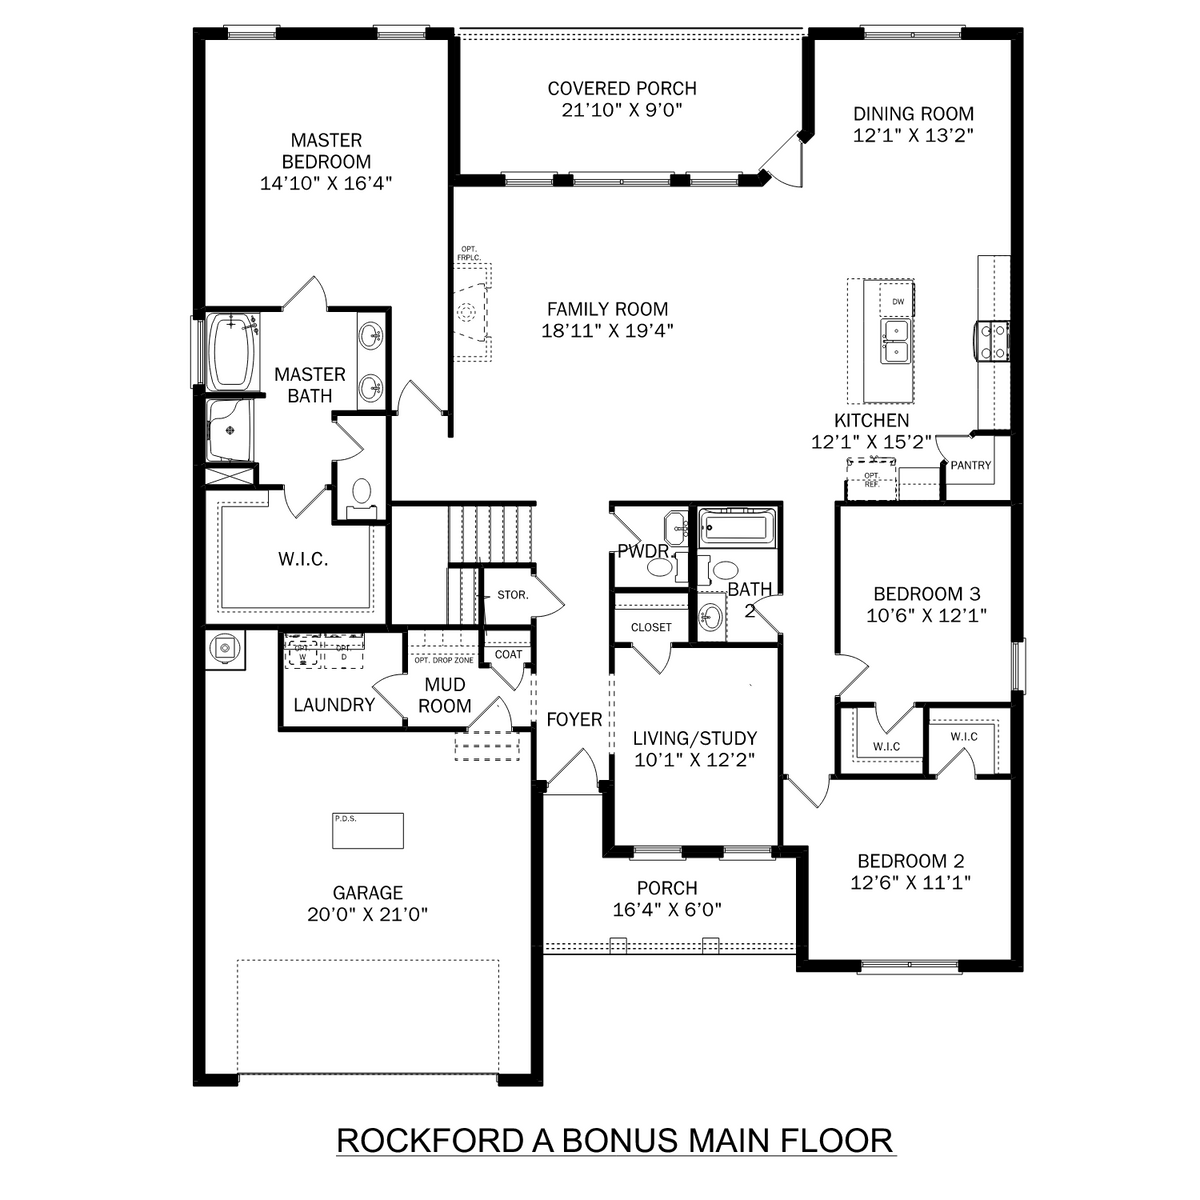 1 - The Rockford with Bonus buildable floor plan layout in Davidson Homes' Cain Park community.